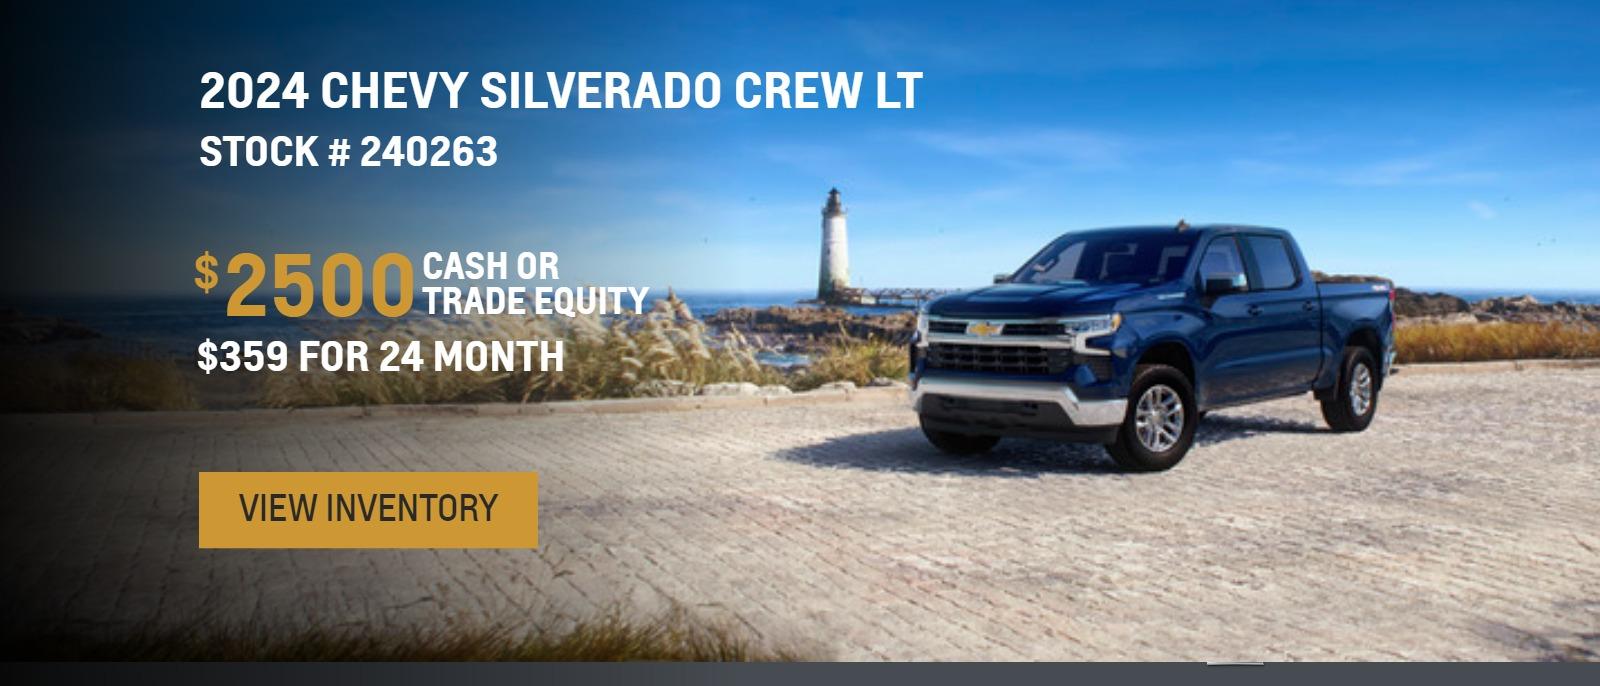 2024 Chevy Silverado Crew LT
$2500 Cash or Trade Equity
$359 for 24 Months
Stock # 240263